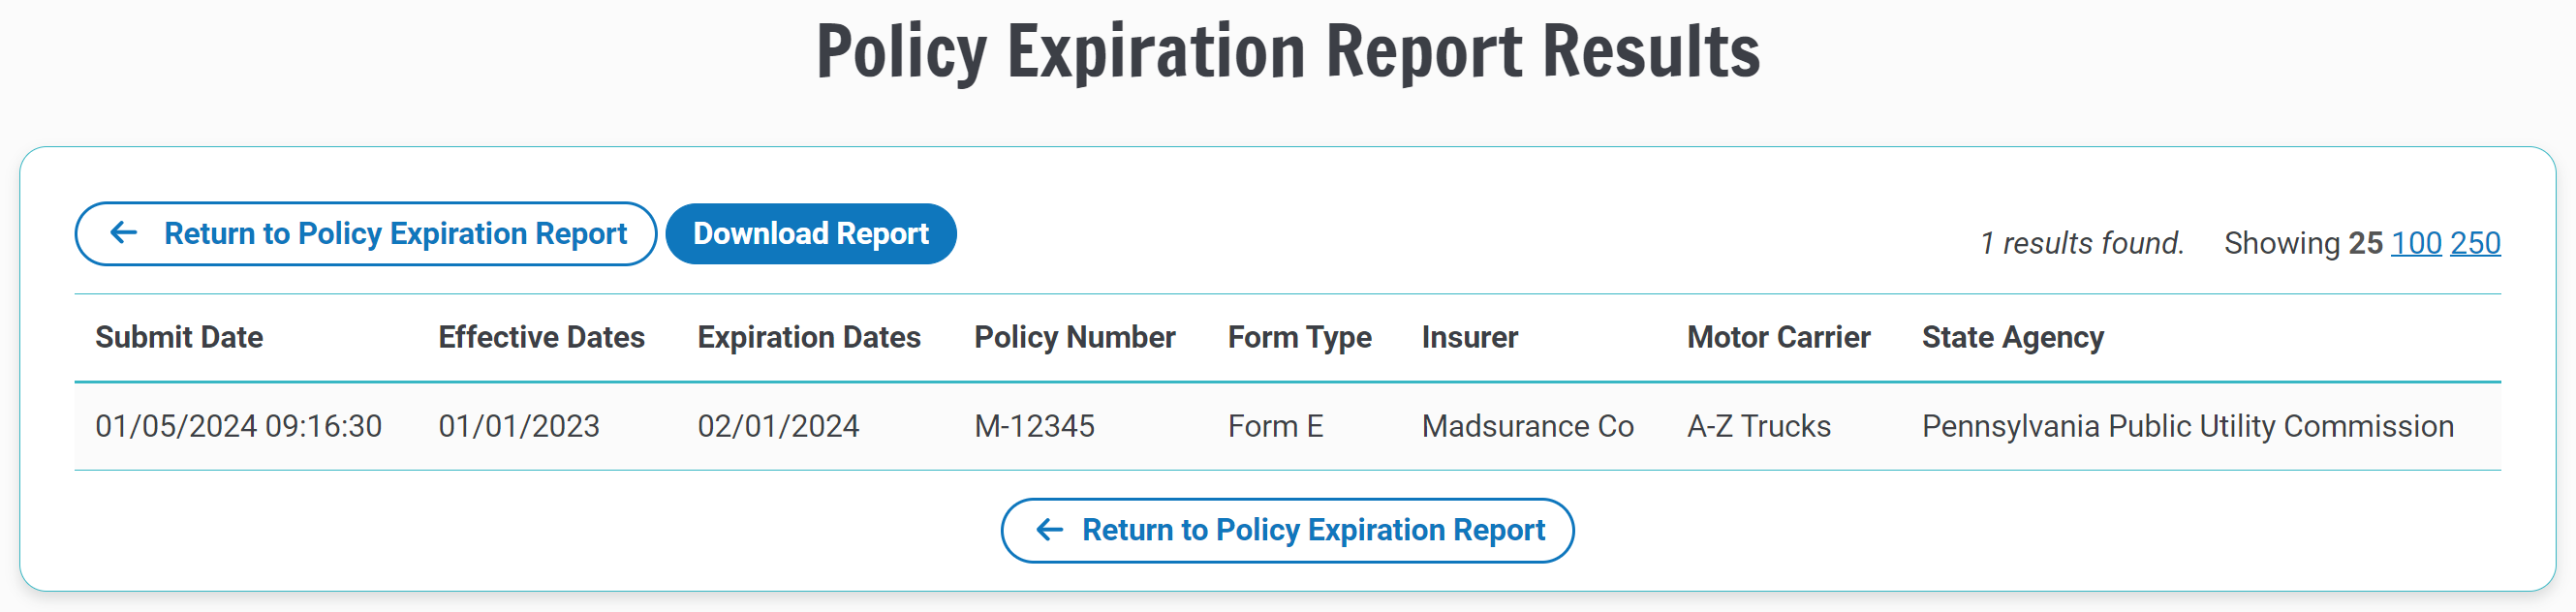 Policy Expiration Report shows policies that match the search criteria and are in an Accepted status.